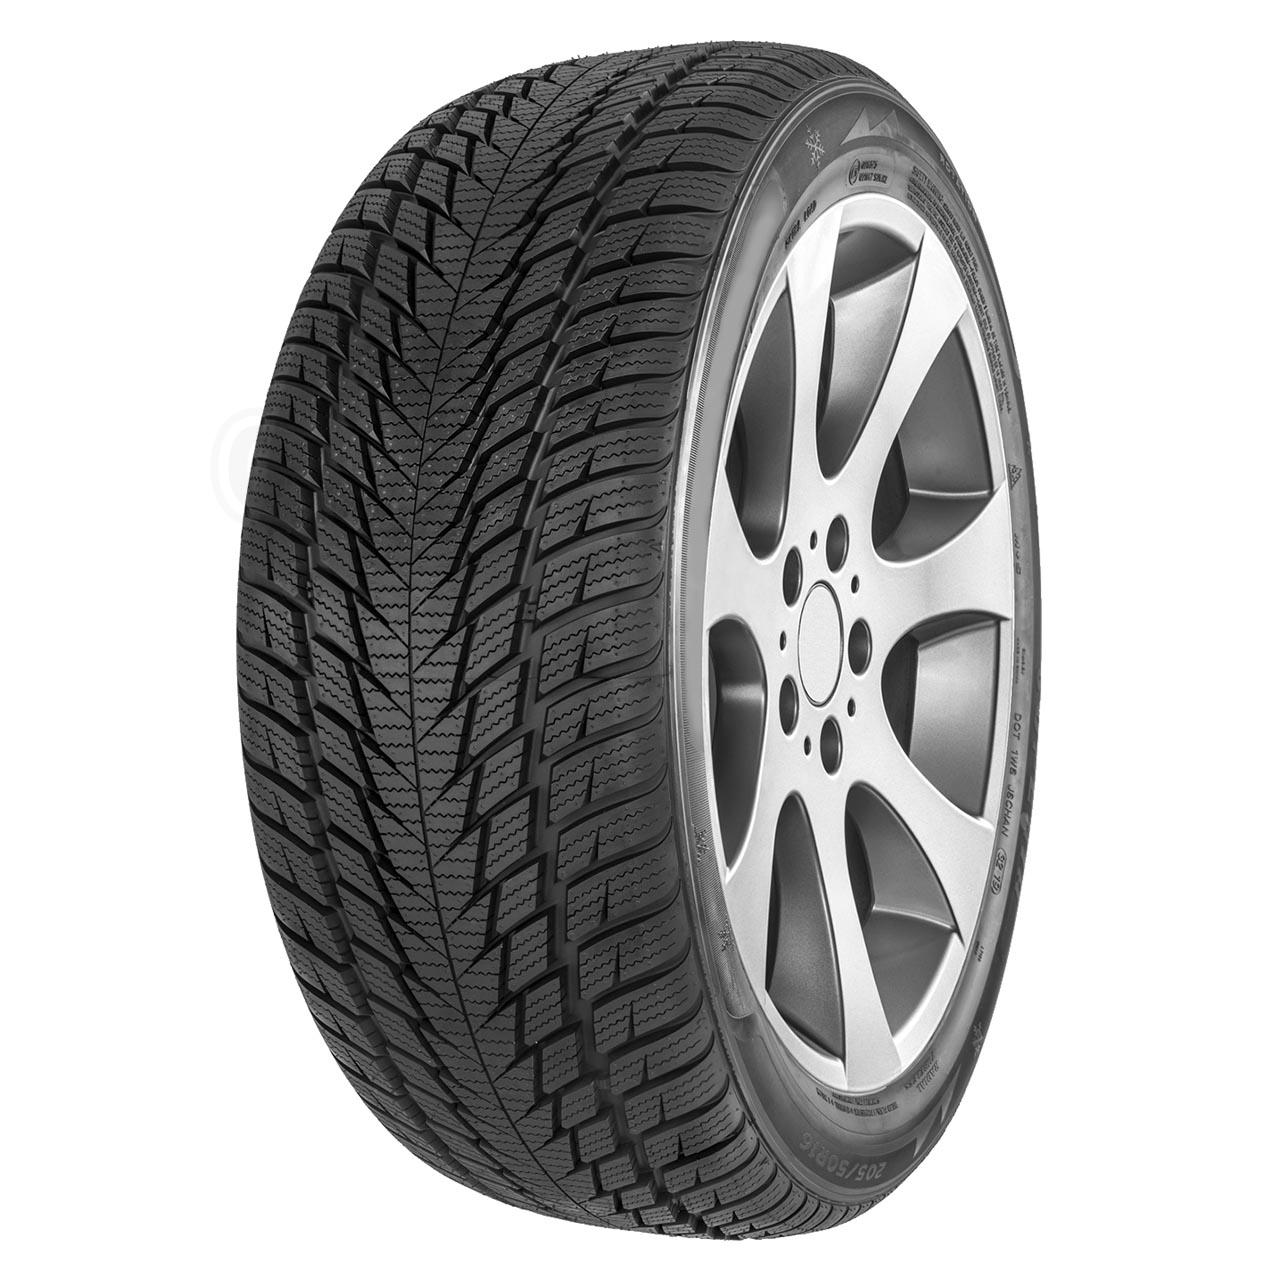 Fortuna Gowin UHP 2 205/50R16 91V XL